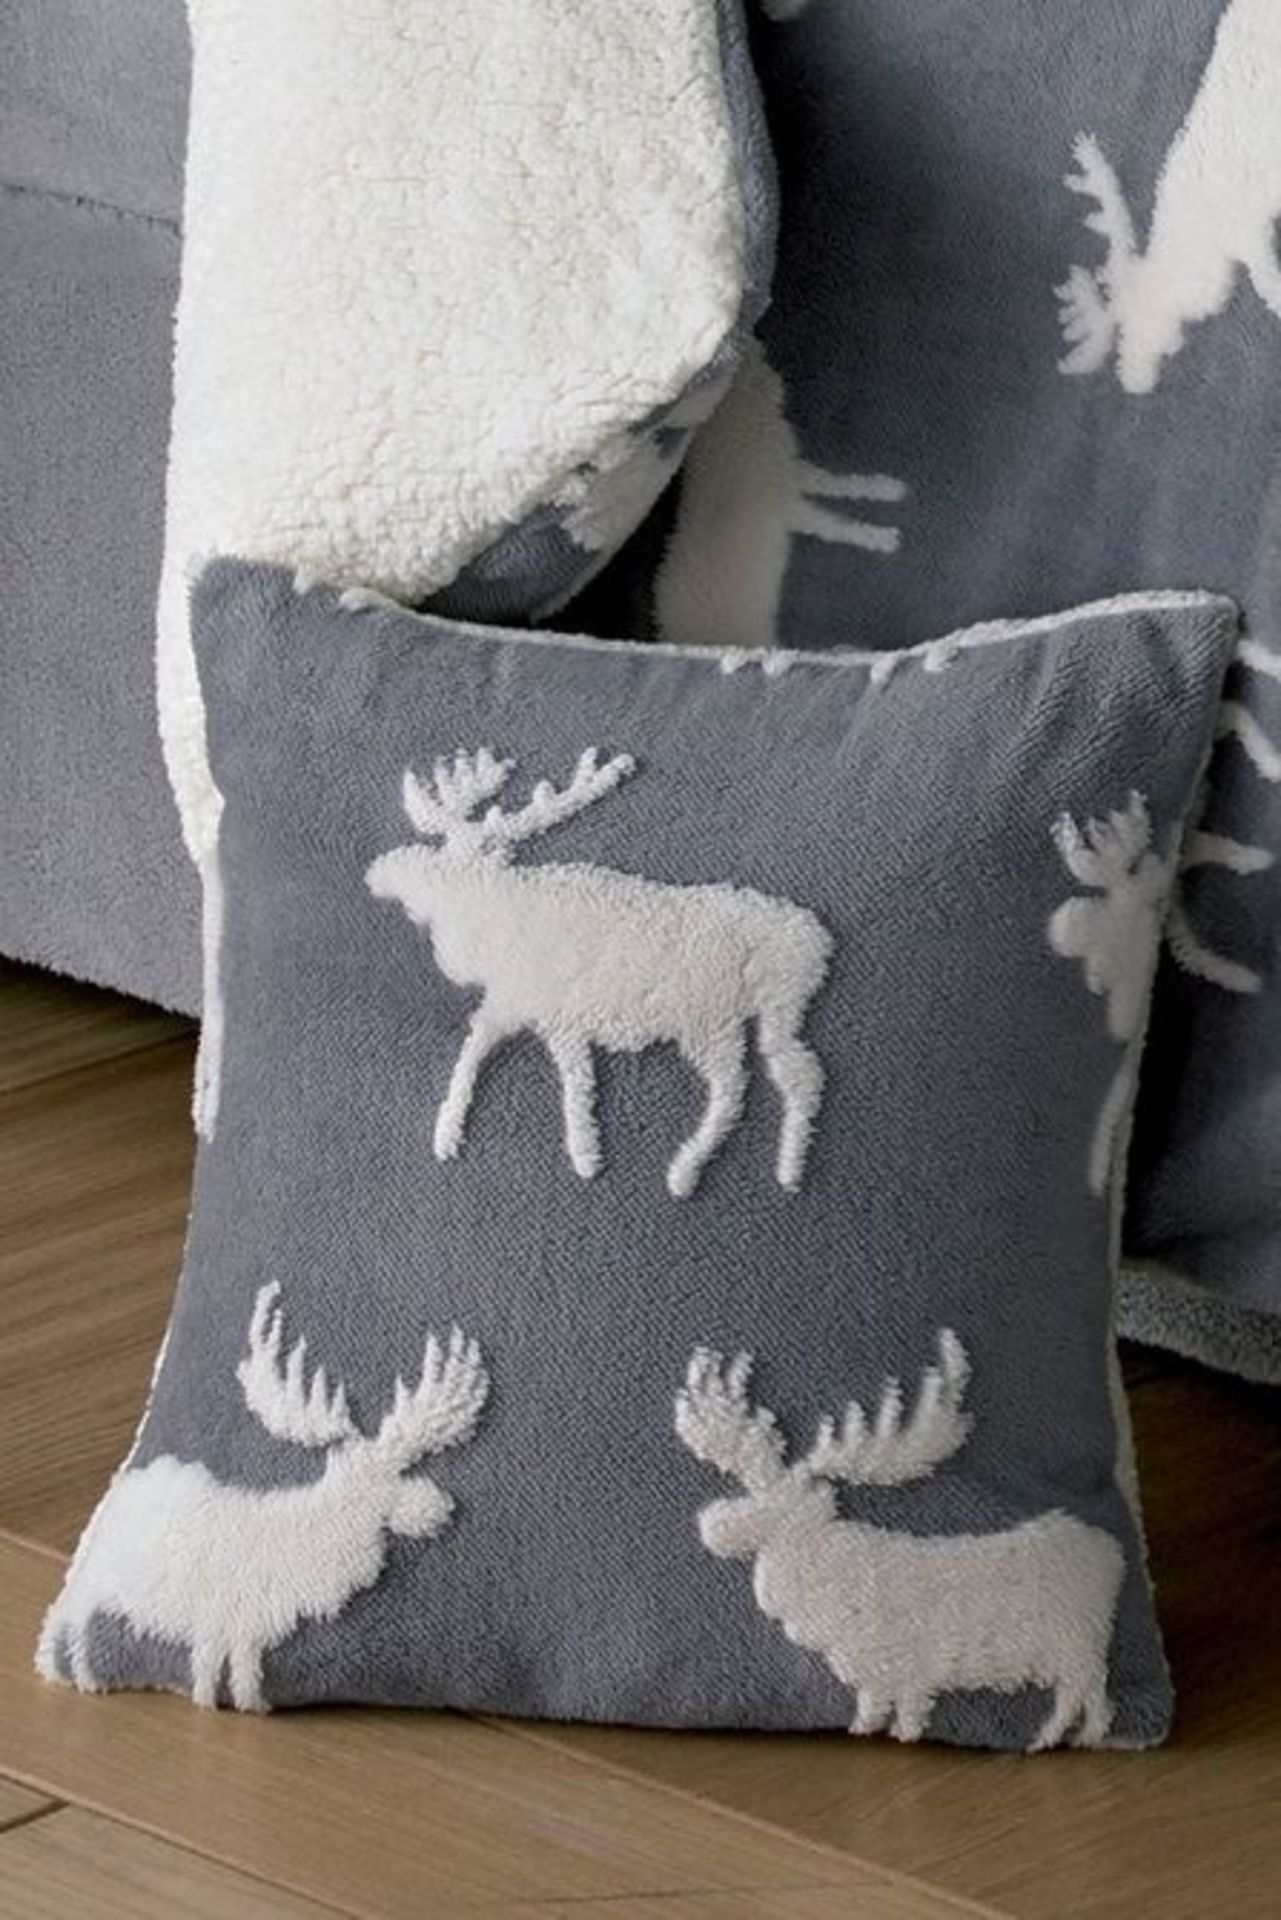 1 BAGGED WARM AND COSY TEDDY 3D STAG CUSHION COVER IN GREY (PUBLIC VIEWING AVAILABLE) - Image 2 of 2